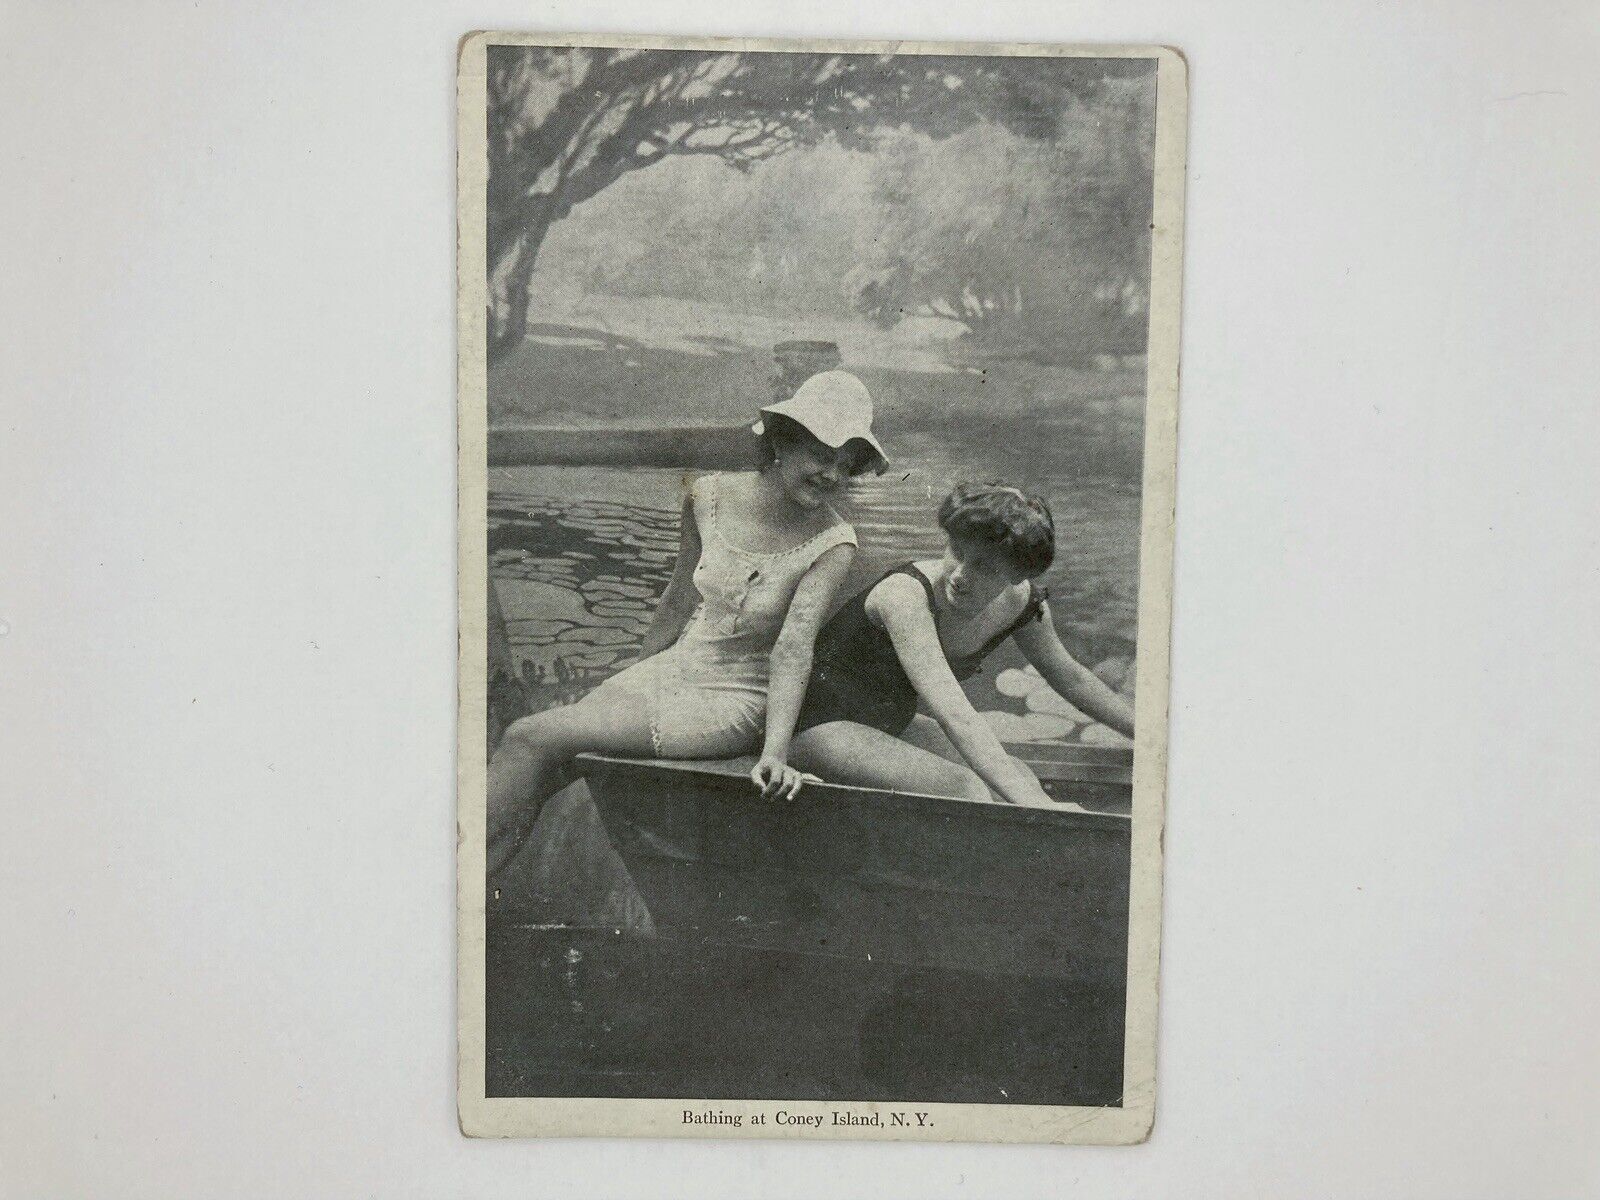 Two Women Bathing At Coney Island, N.Y. Vintage Black and White Postcard